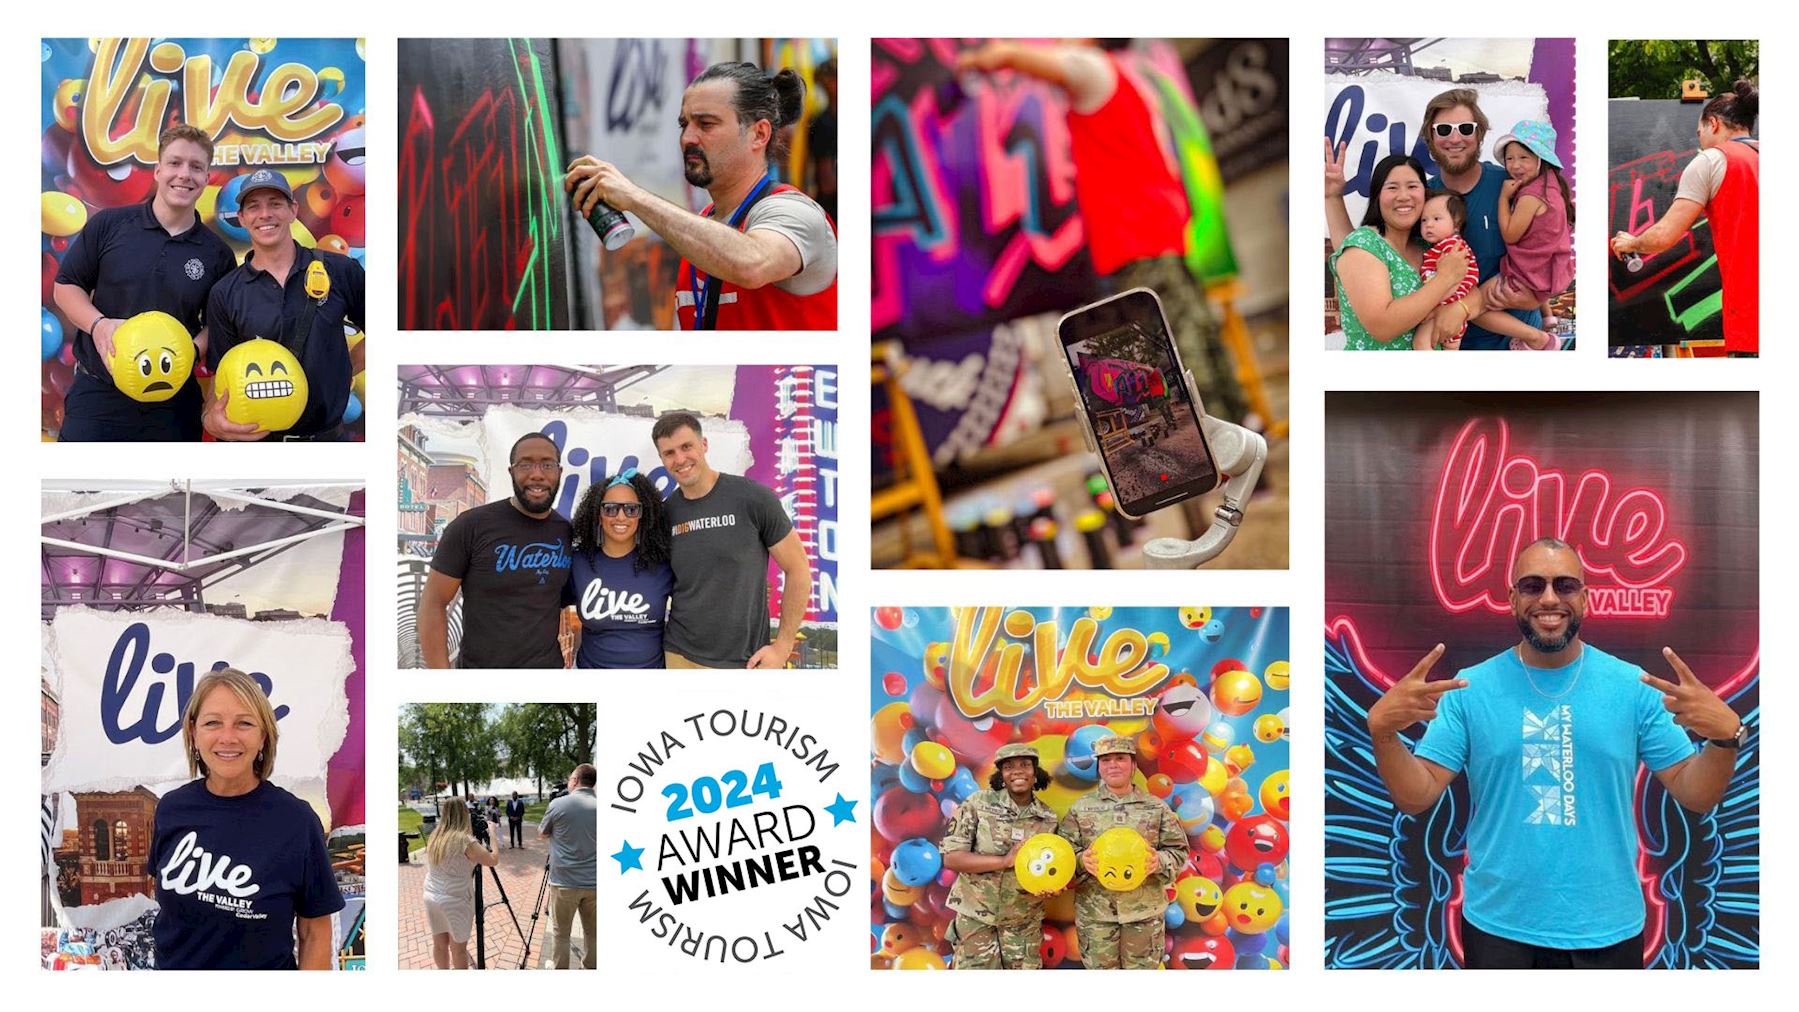 Cedar Valley's Win: Grow Cedar Valley Takes Home Iowa Tourism People's Choice Award for Live the Valley Selfie Mural